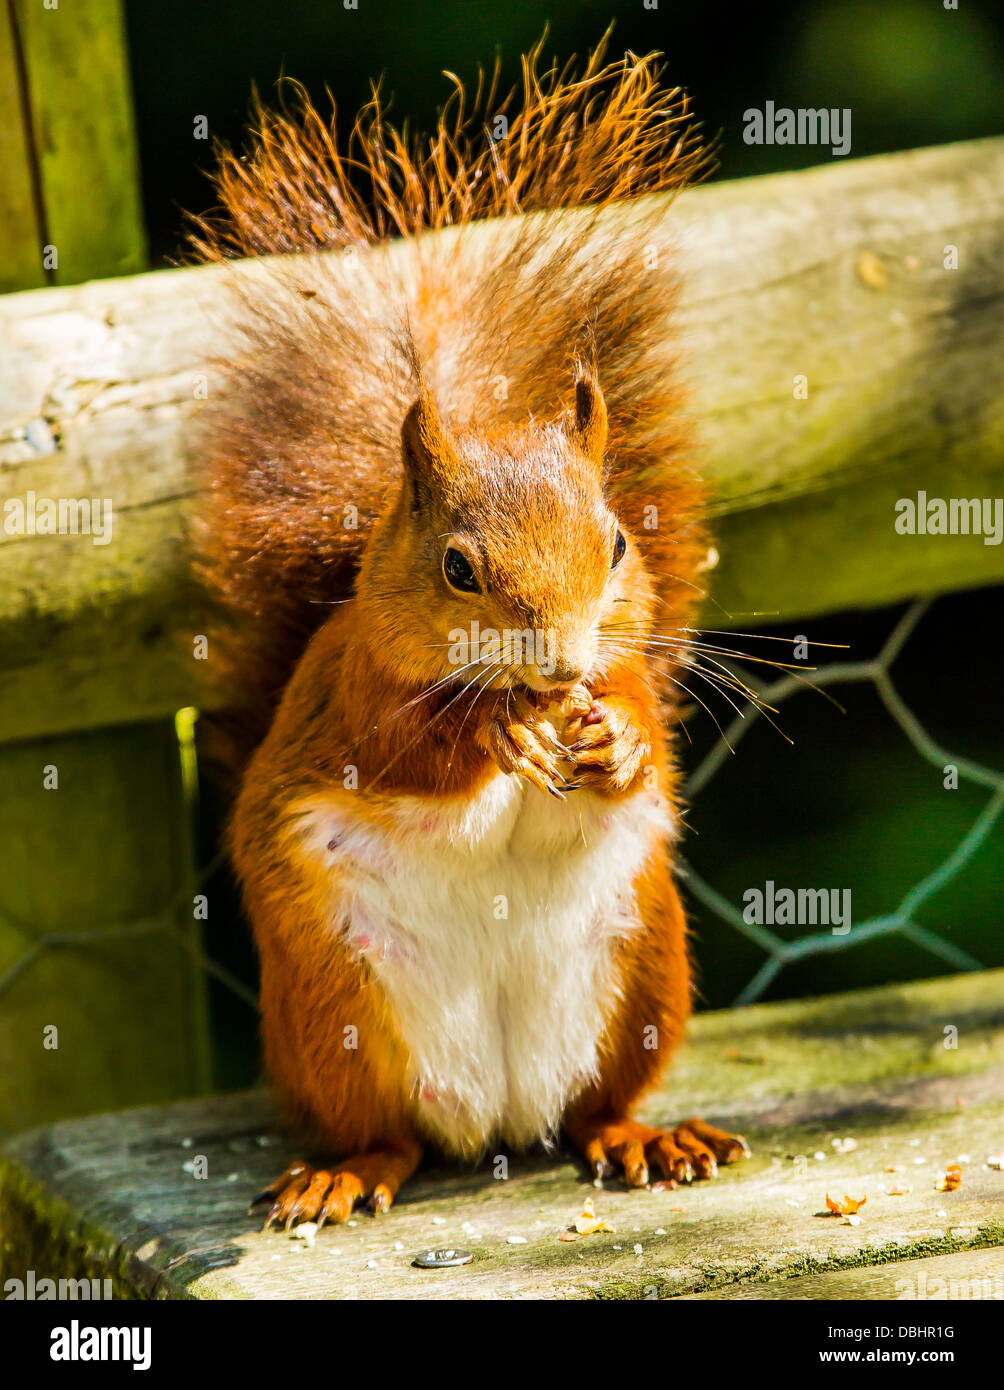 Red Squirrel on bench Stock Photo